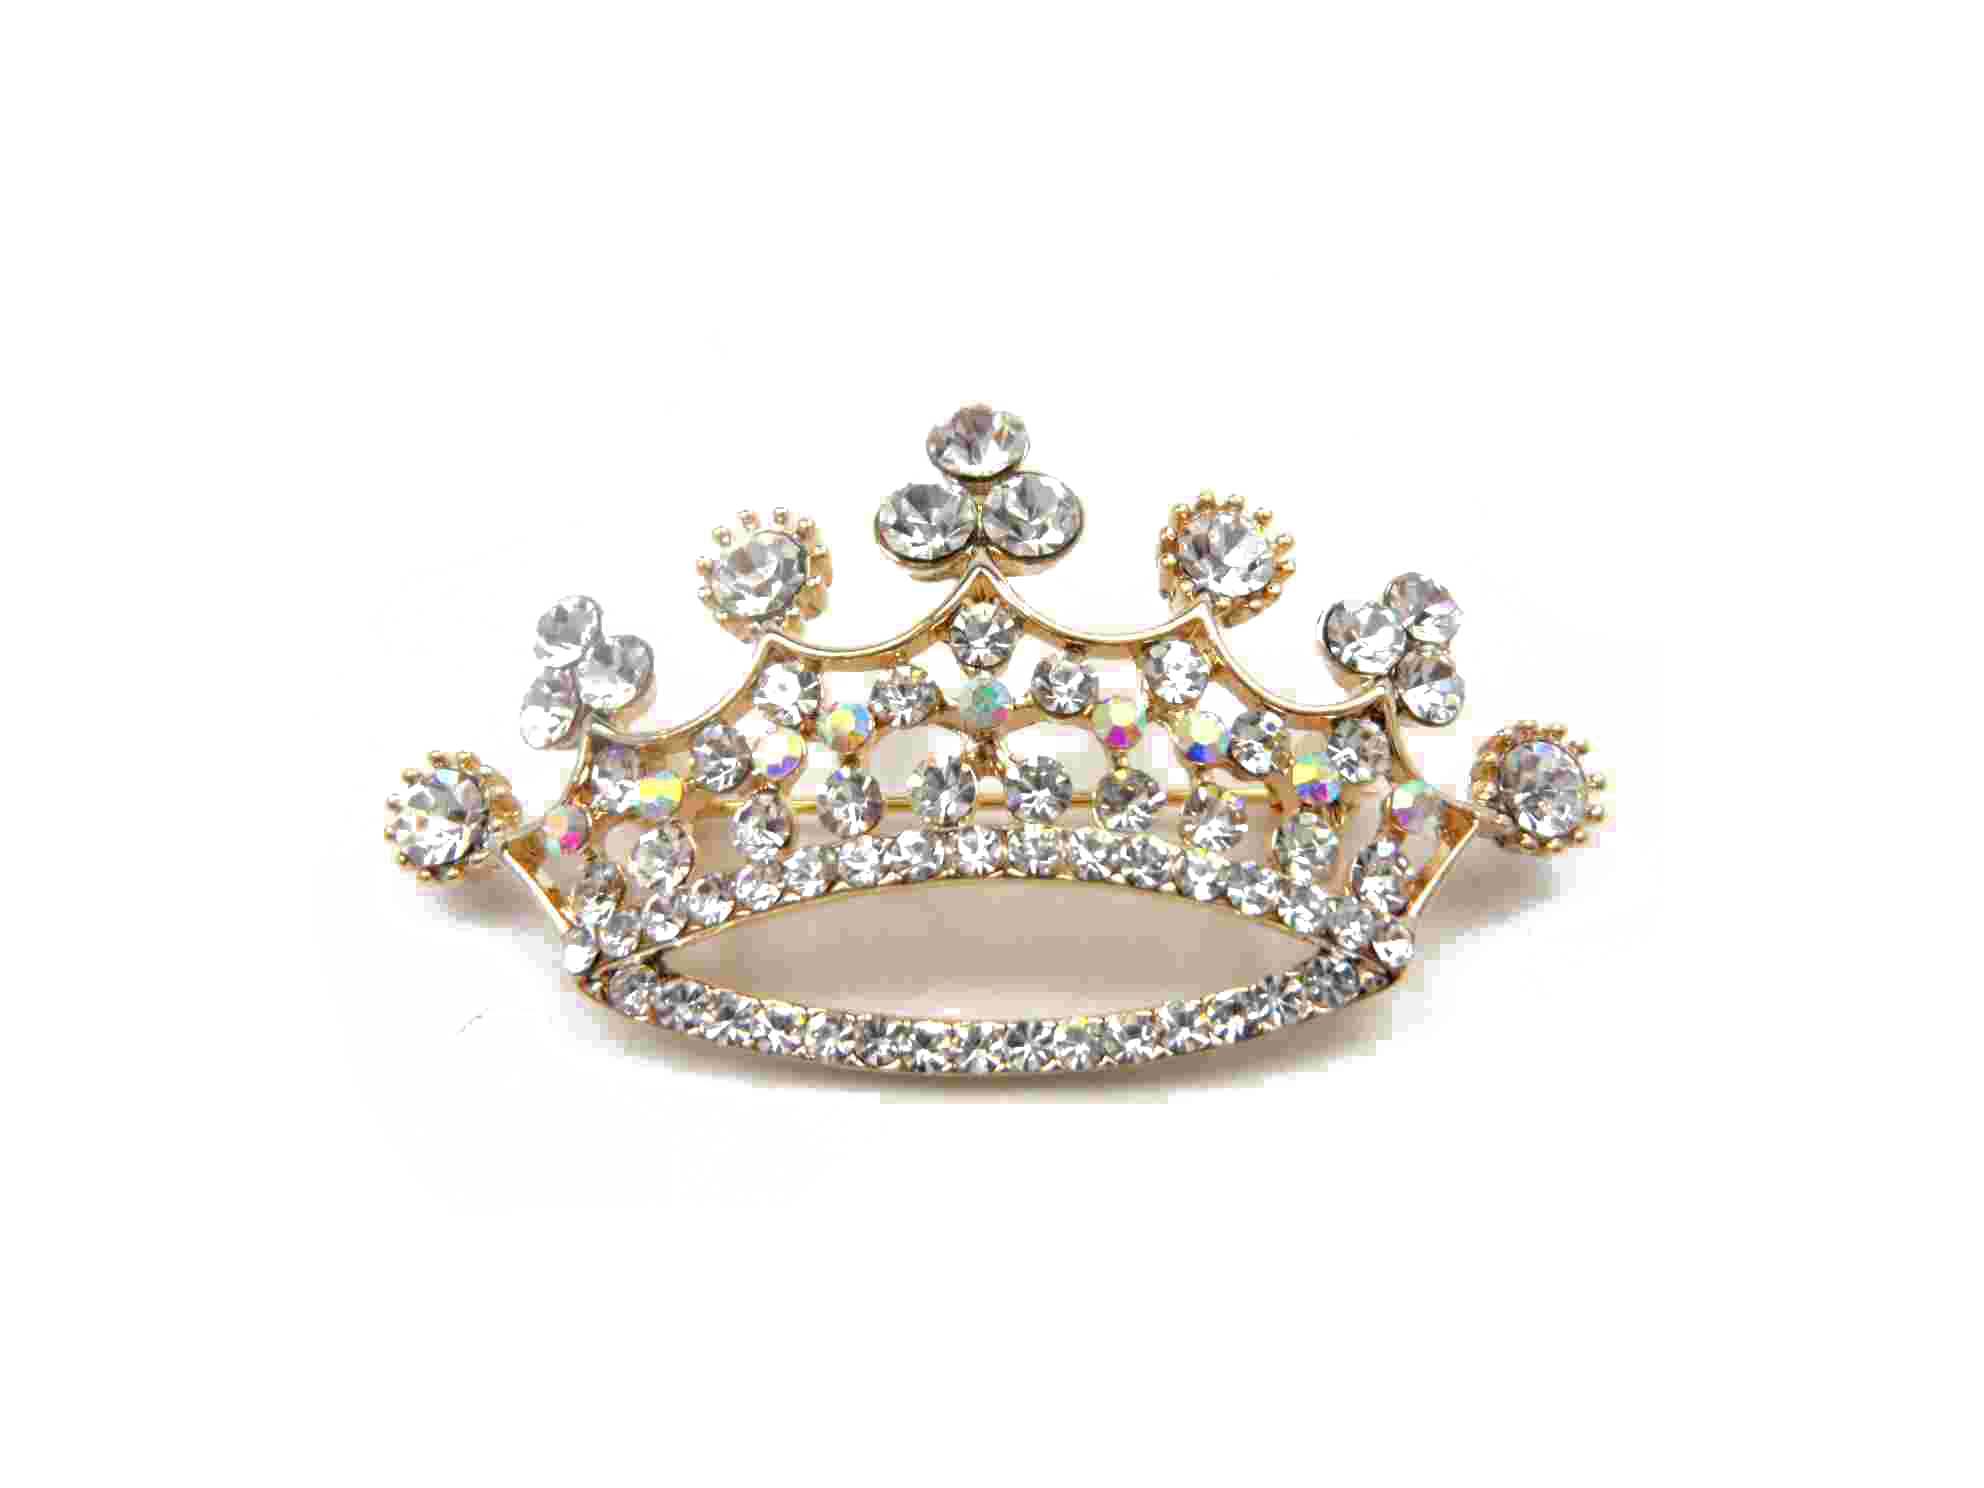 Fashionable crown brooch, made of zinc-alloy and glass, available in various designs 